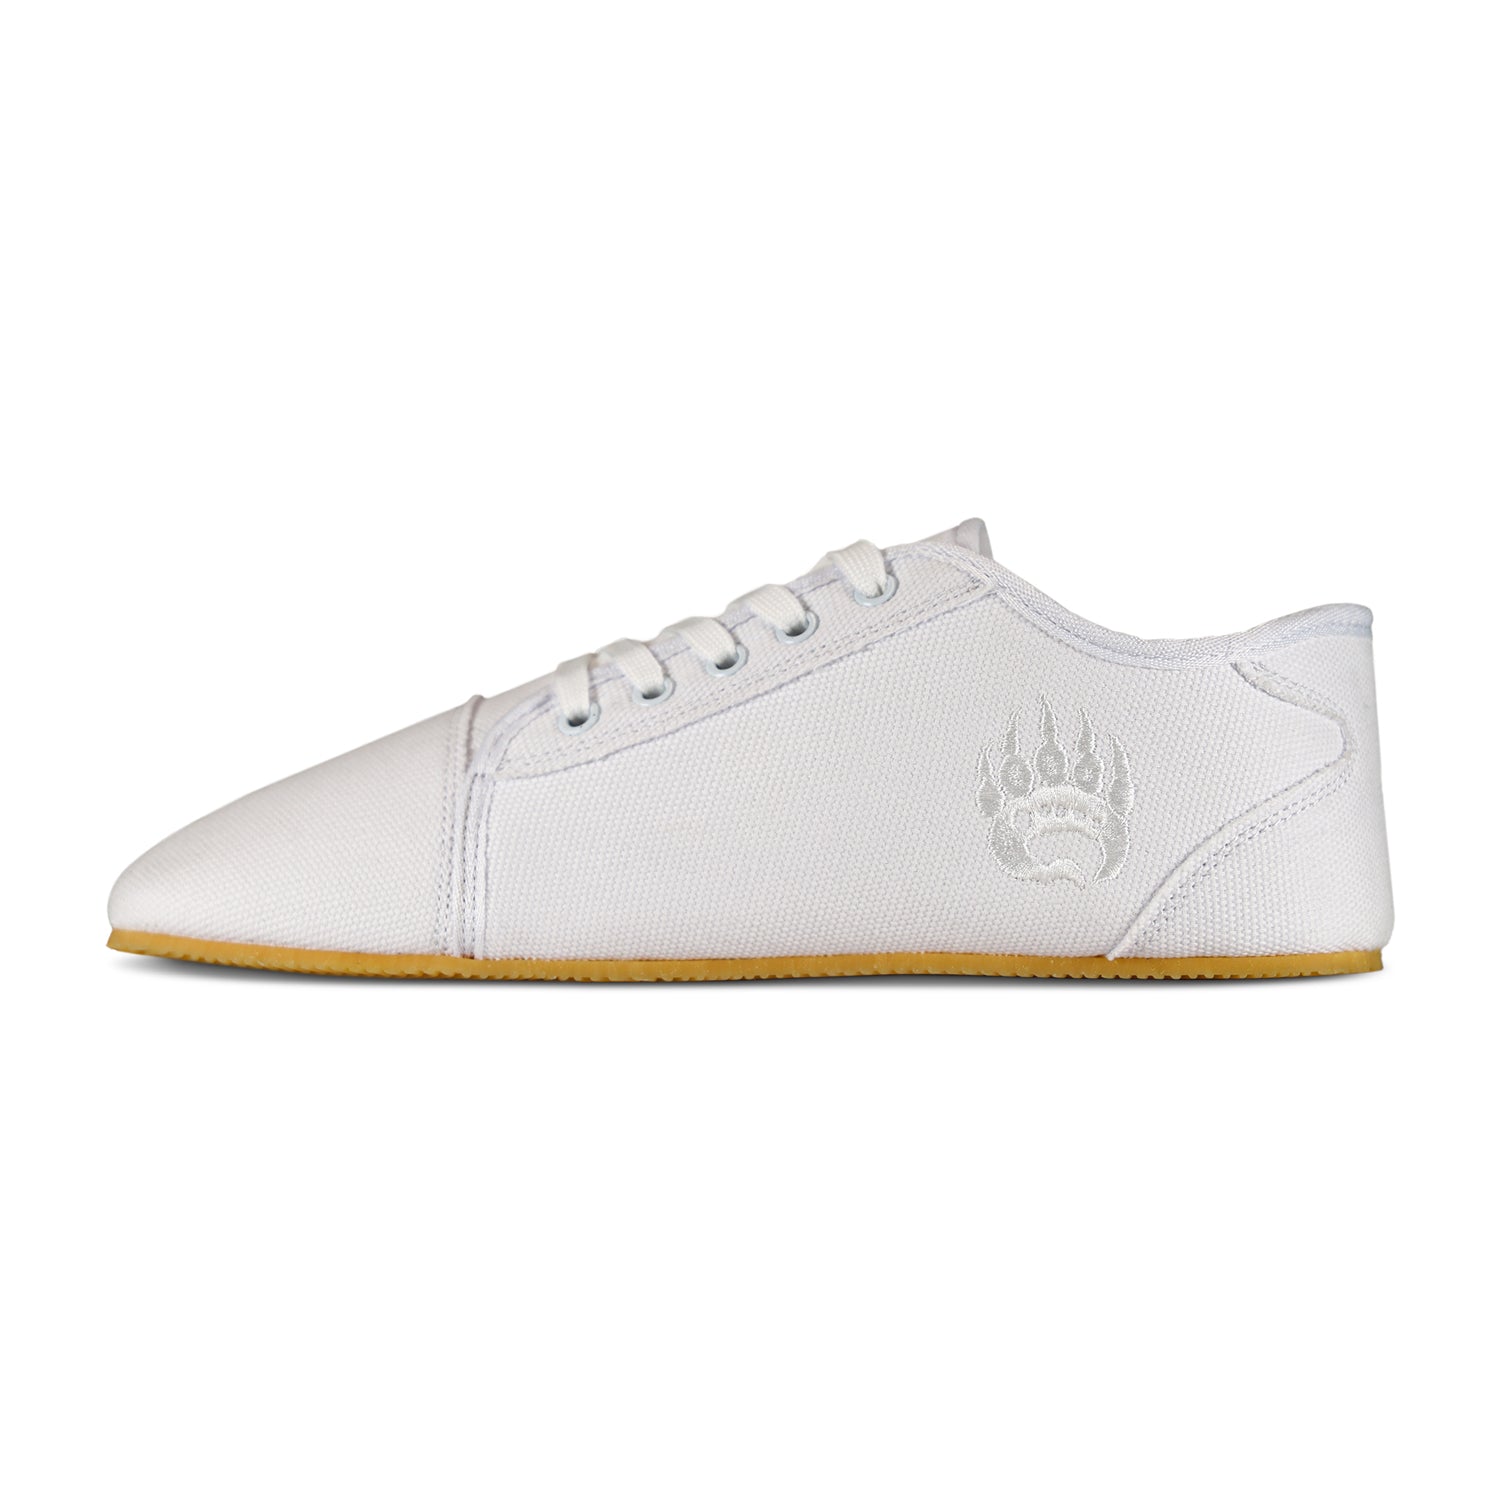 White Ursus Canvas low-top training sneaker with a minimalist design, featuring a pattern detail near the heel and a tan sole by Bearfoot.